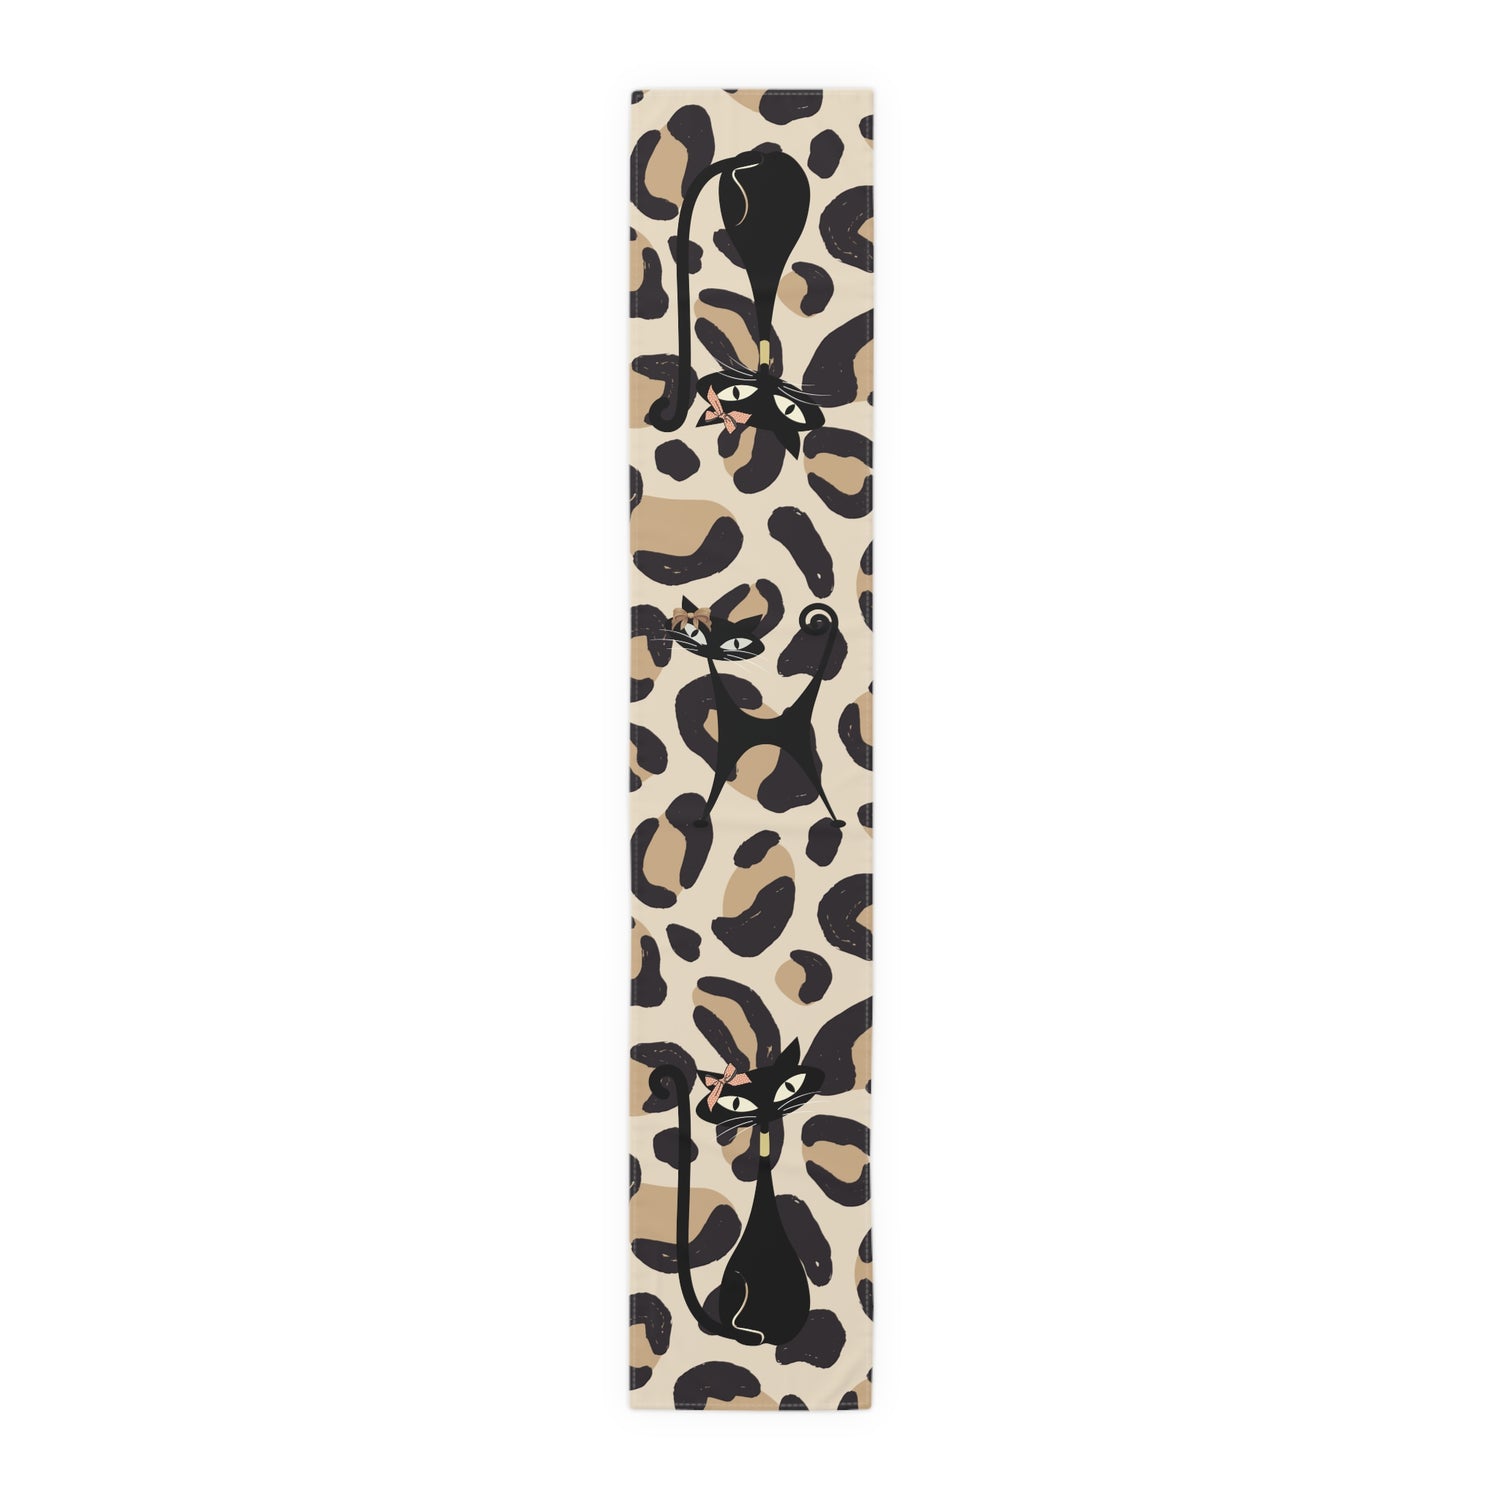 Atomic Cat Leopard Print Boujee Dining Room, Kitchen, Sideboard, Mid Mod Table Runner